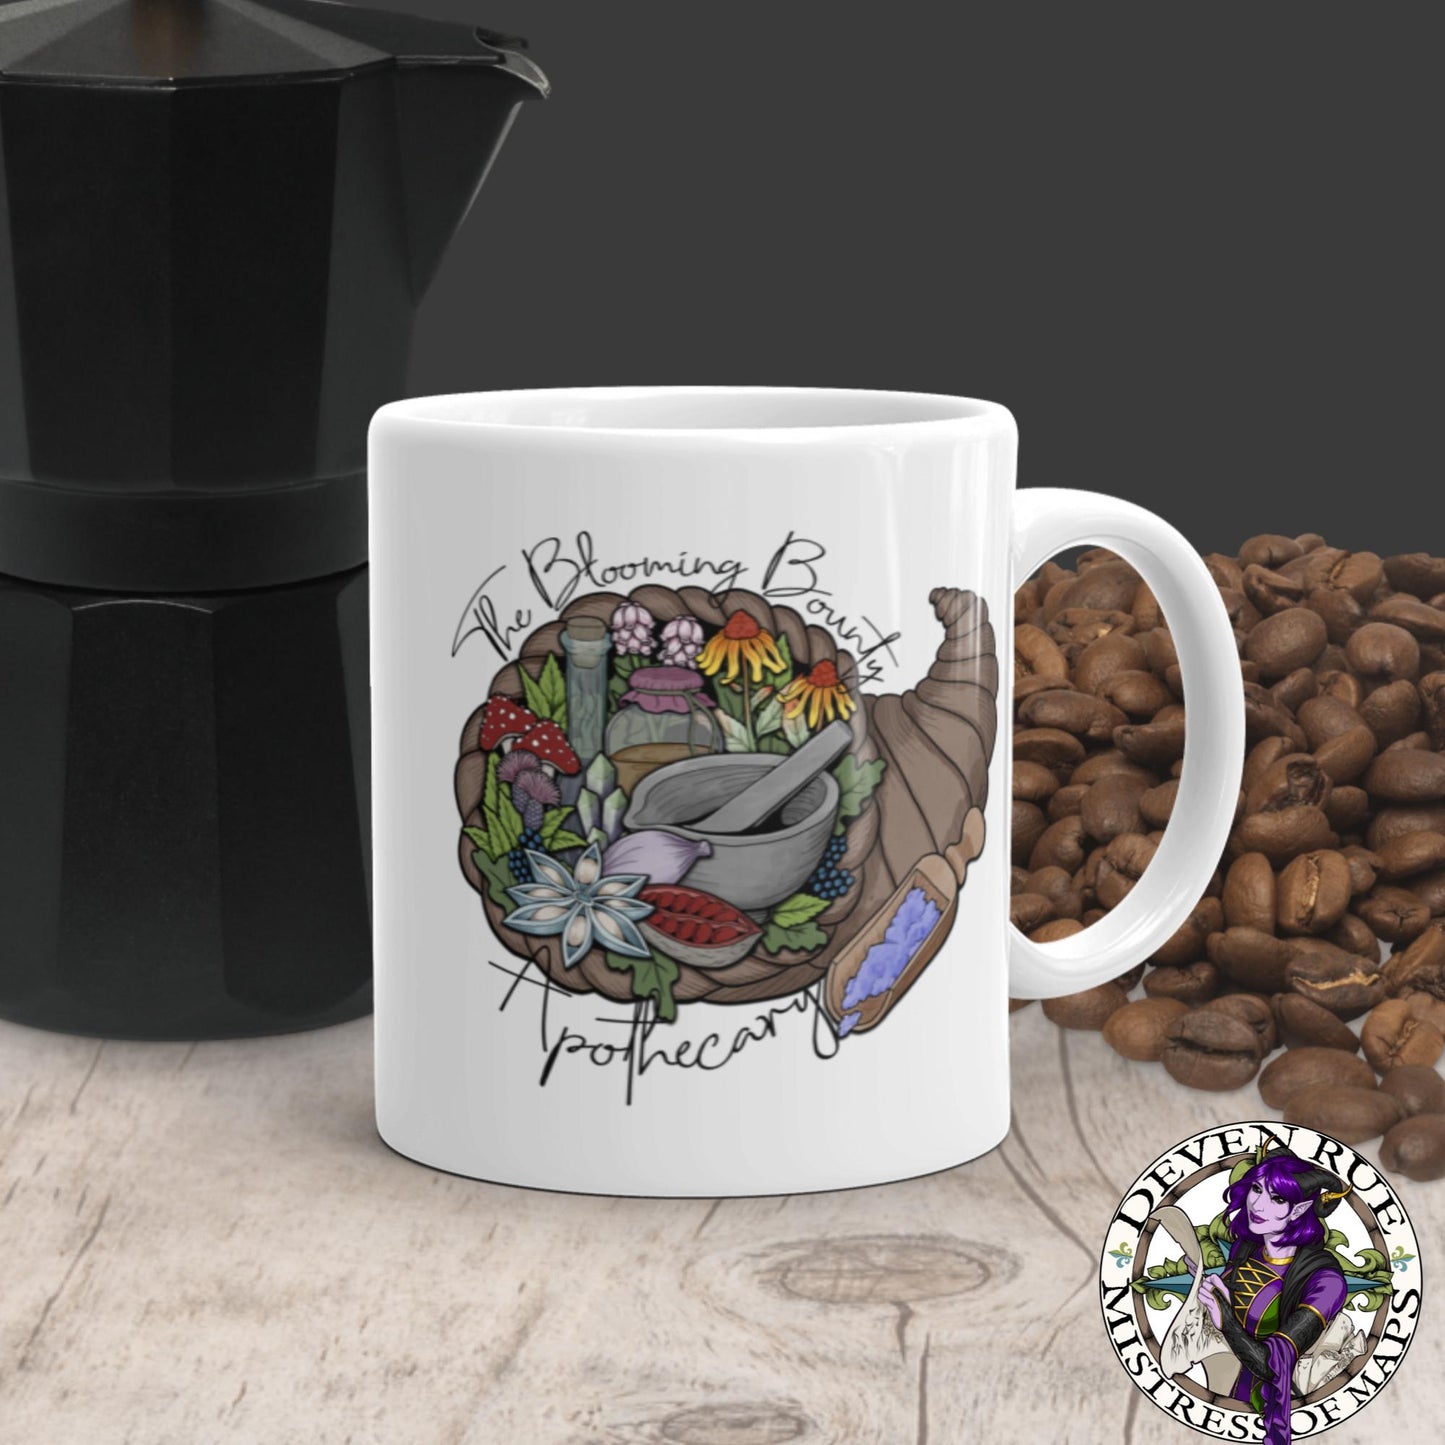 A white mug with The Blooming Bounty Apothecary logo featuring a cornucopia of herbalism supplies, sits with coffee beans and a kettle.